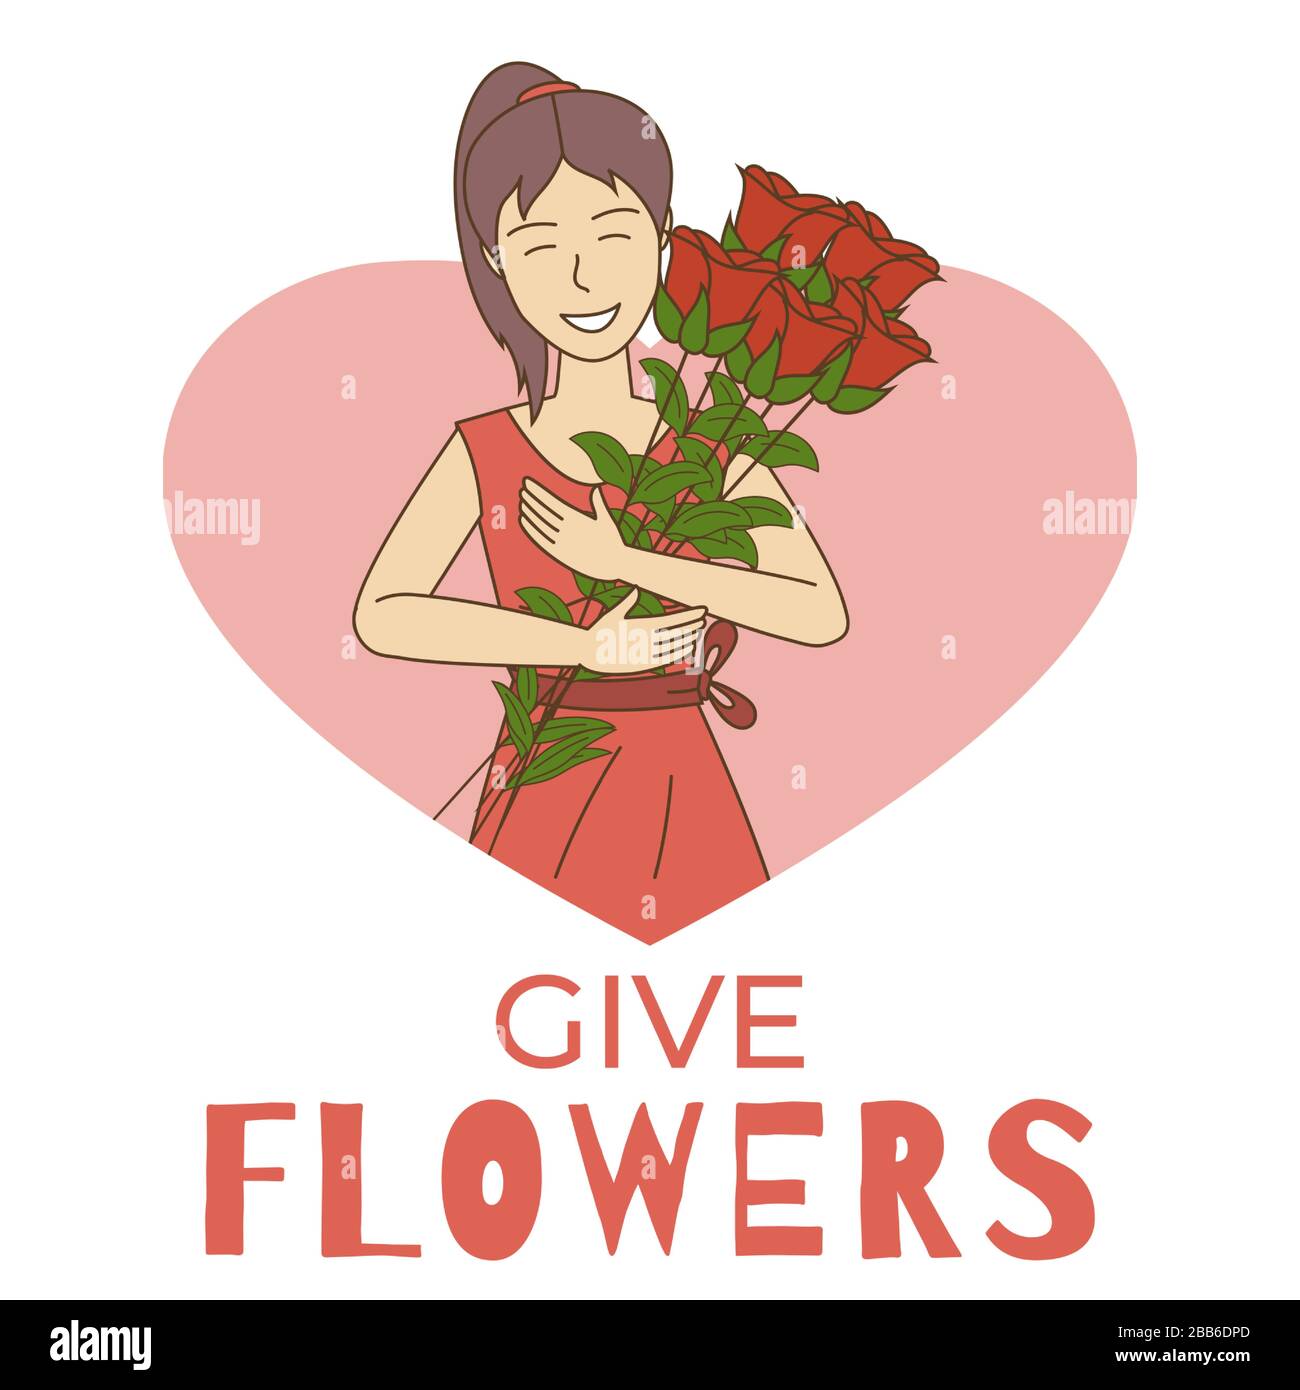 Flower day flyer design template with text space. Young smiling woman holding bouquet of roses in hands vector cartoon outline illustration. Flower shop, sale, women day, gardening poster design. Stock Vector